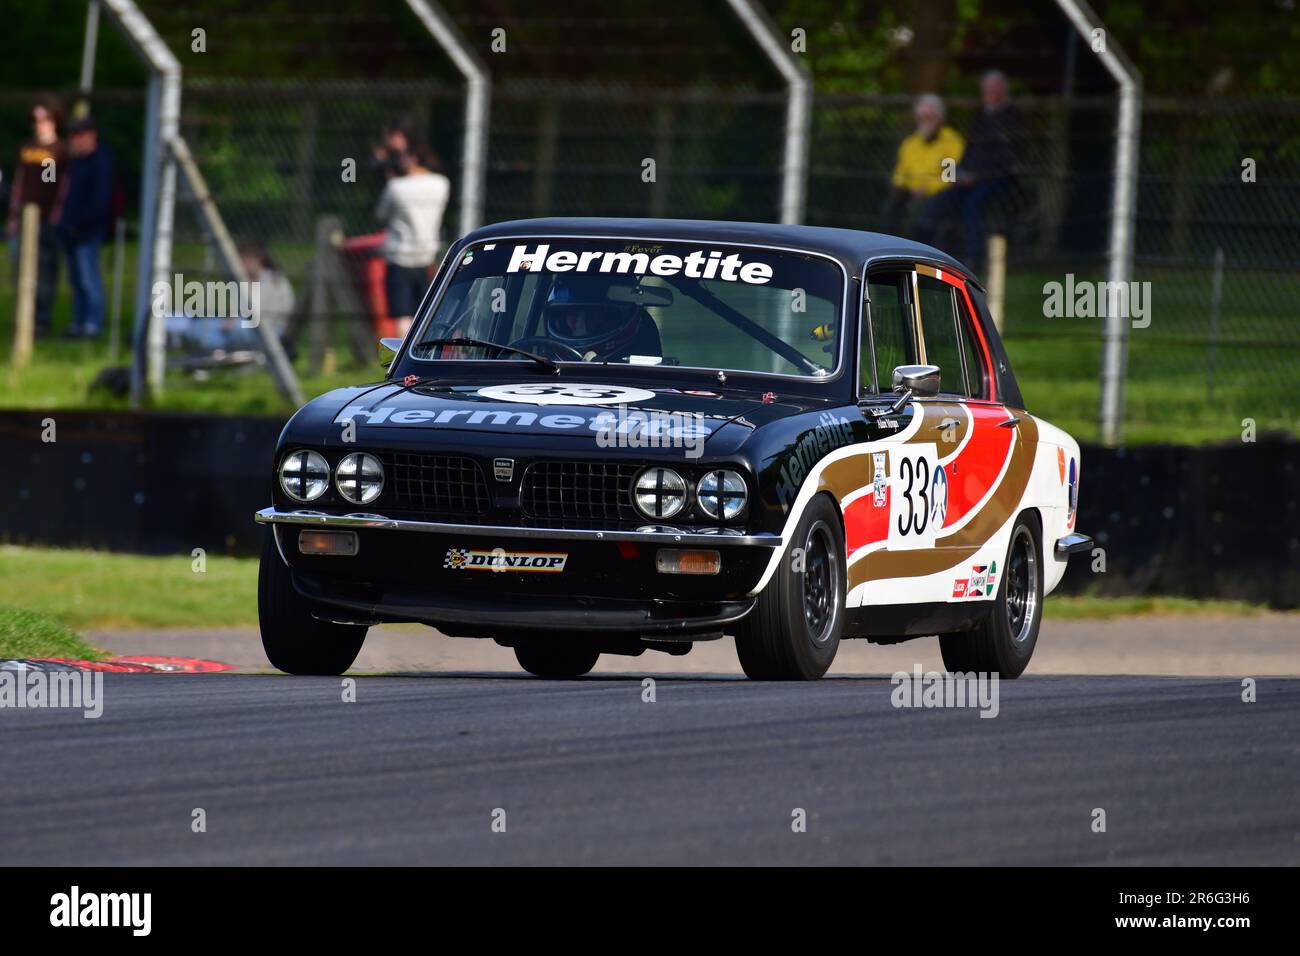 Ken Clarke, Triumph Dolomite Sprint, HRDC ‘Gerry Marshall’ Trophy Series, over 30 cars on the grid for a forty five minute two driver race featuring p Stock Photo